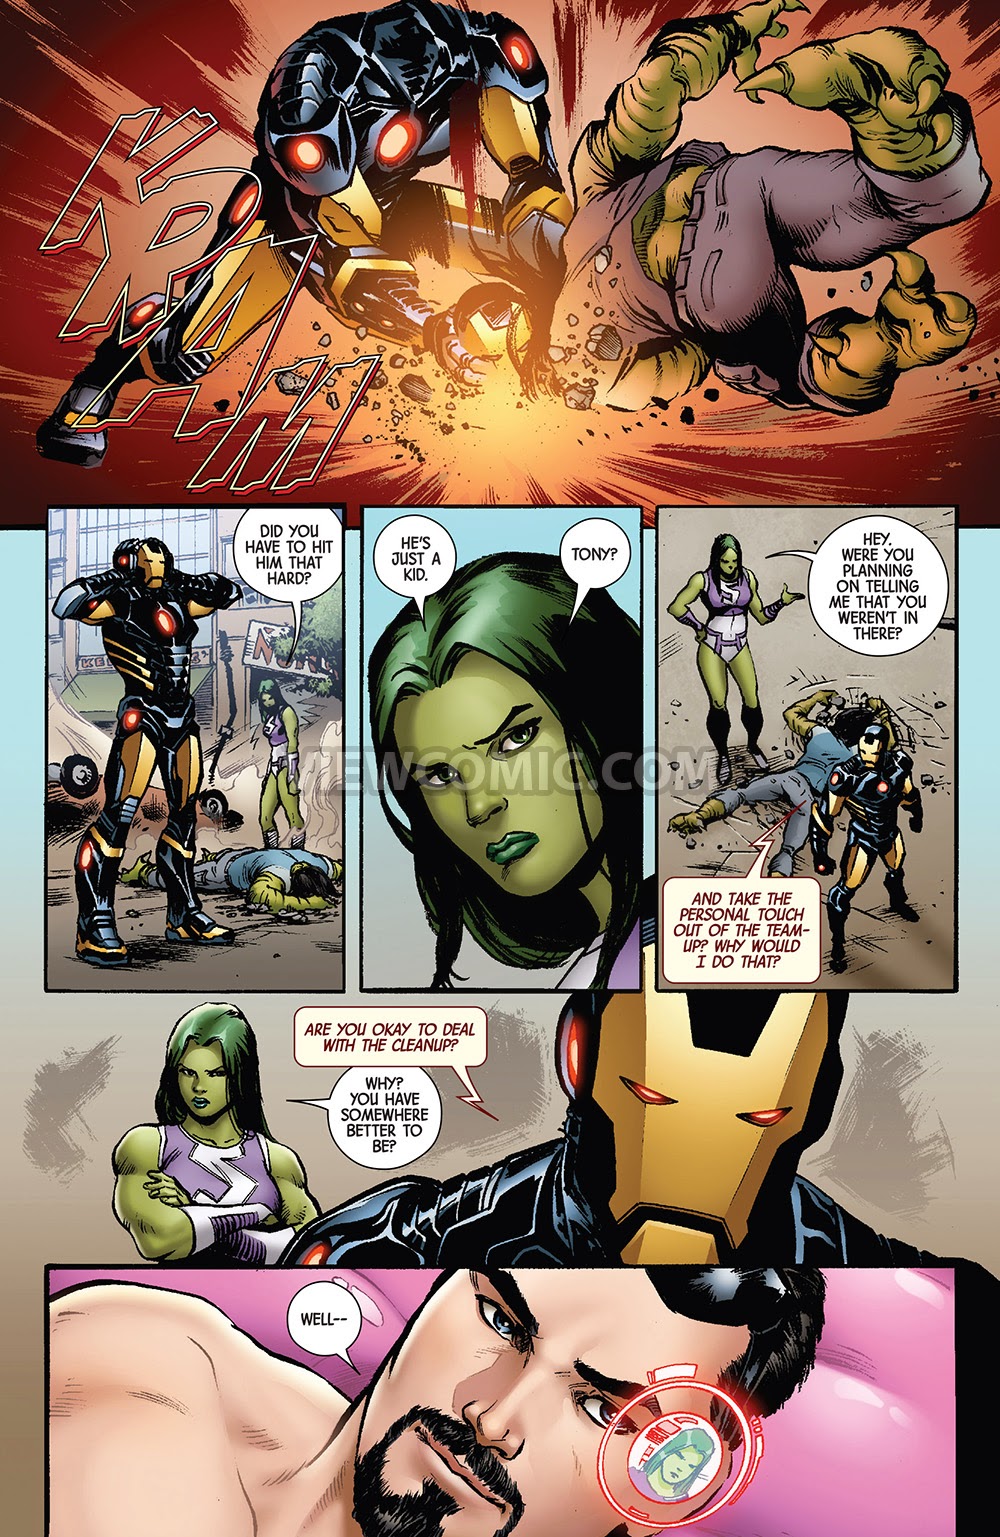 Superior Iron Man 001 2015 | Read Superior Iron Man 001 2015 comic online  in high quality. Read Full Comic online for free - Read comics online in  high quality .| READ COMIC ONLINE